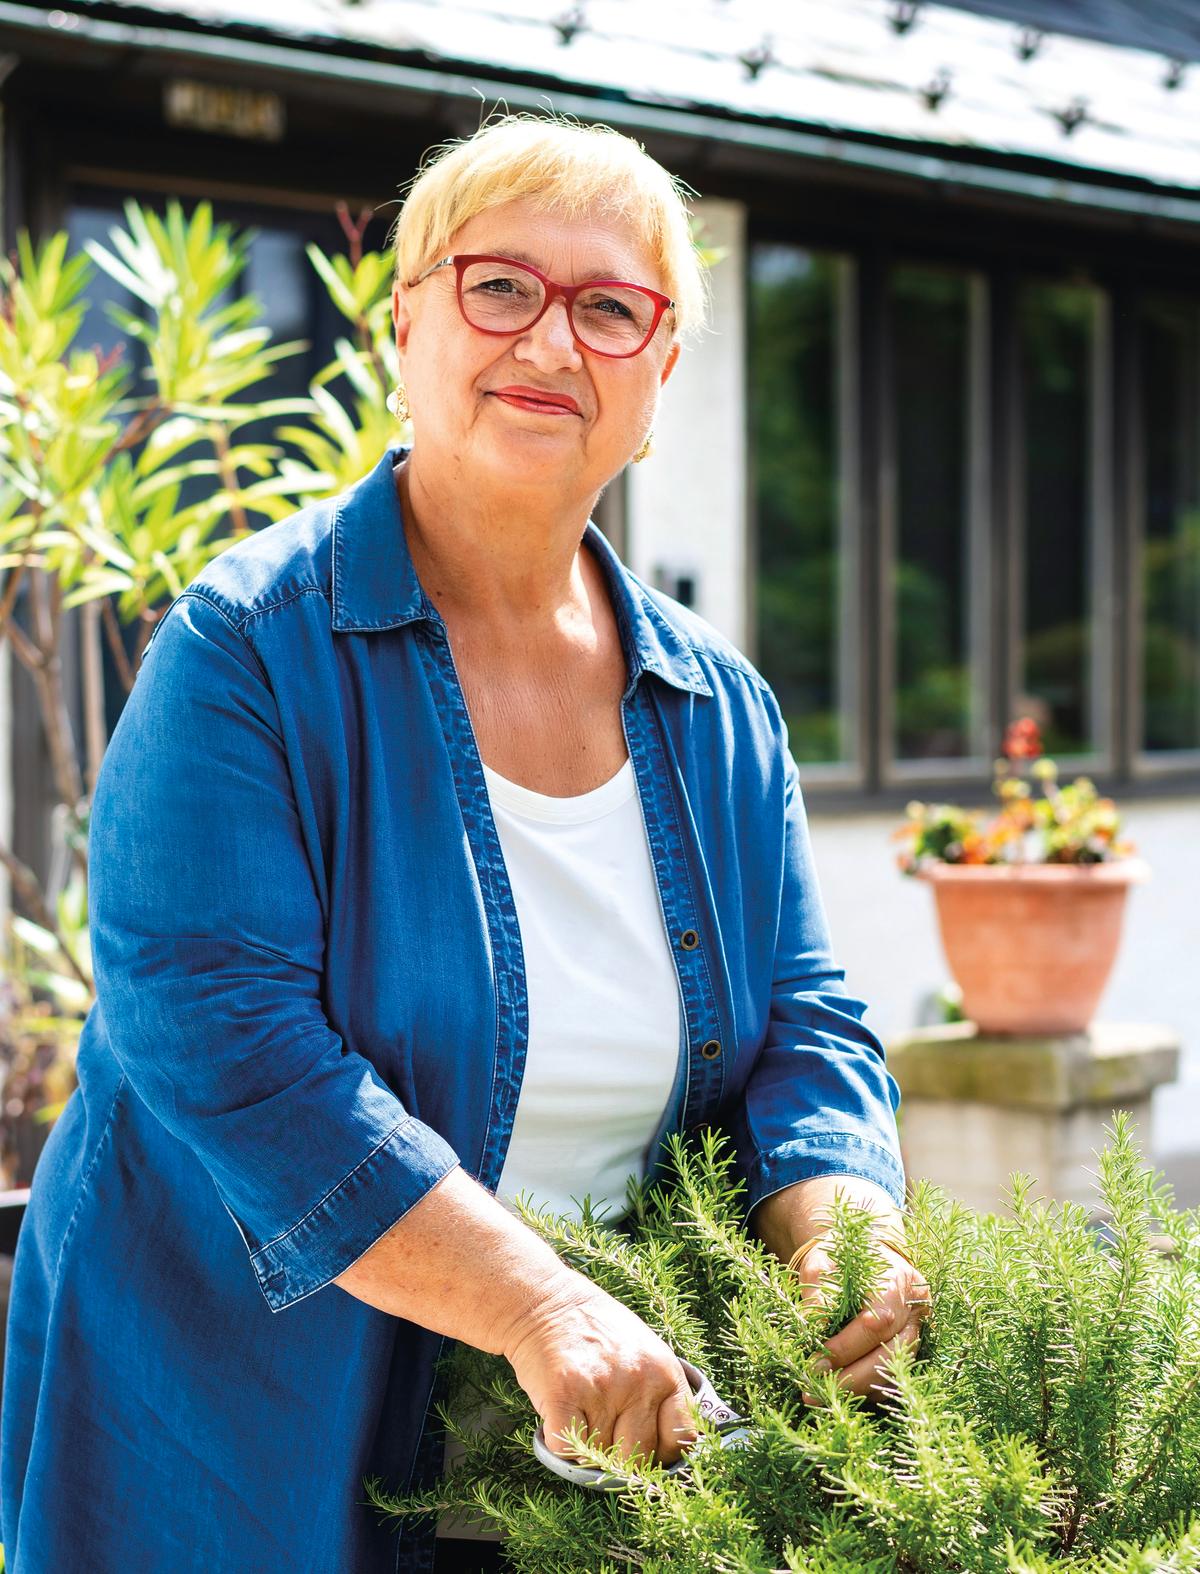 Ms. Bastianich harvests sprigs of fresh rosemary from her garden. (Samira Bouaou for American Essence)